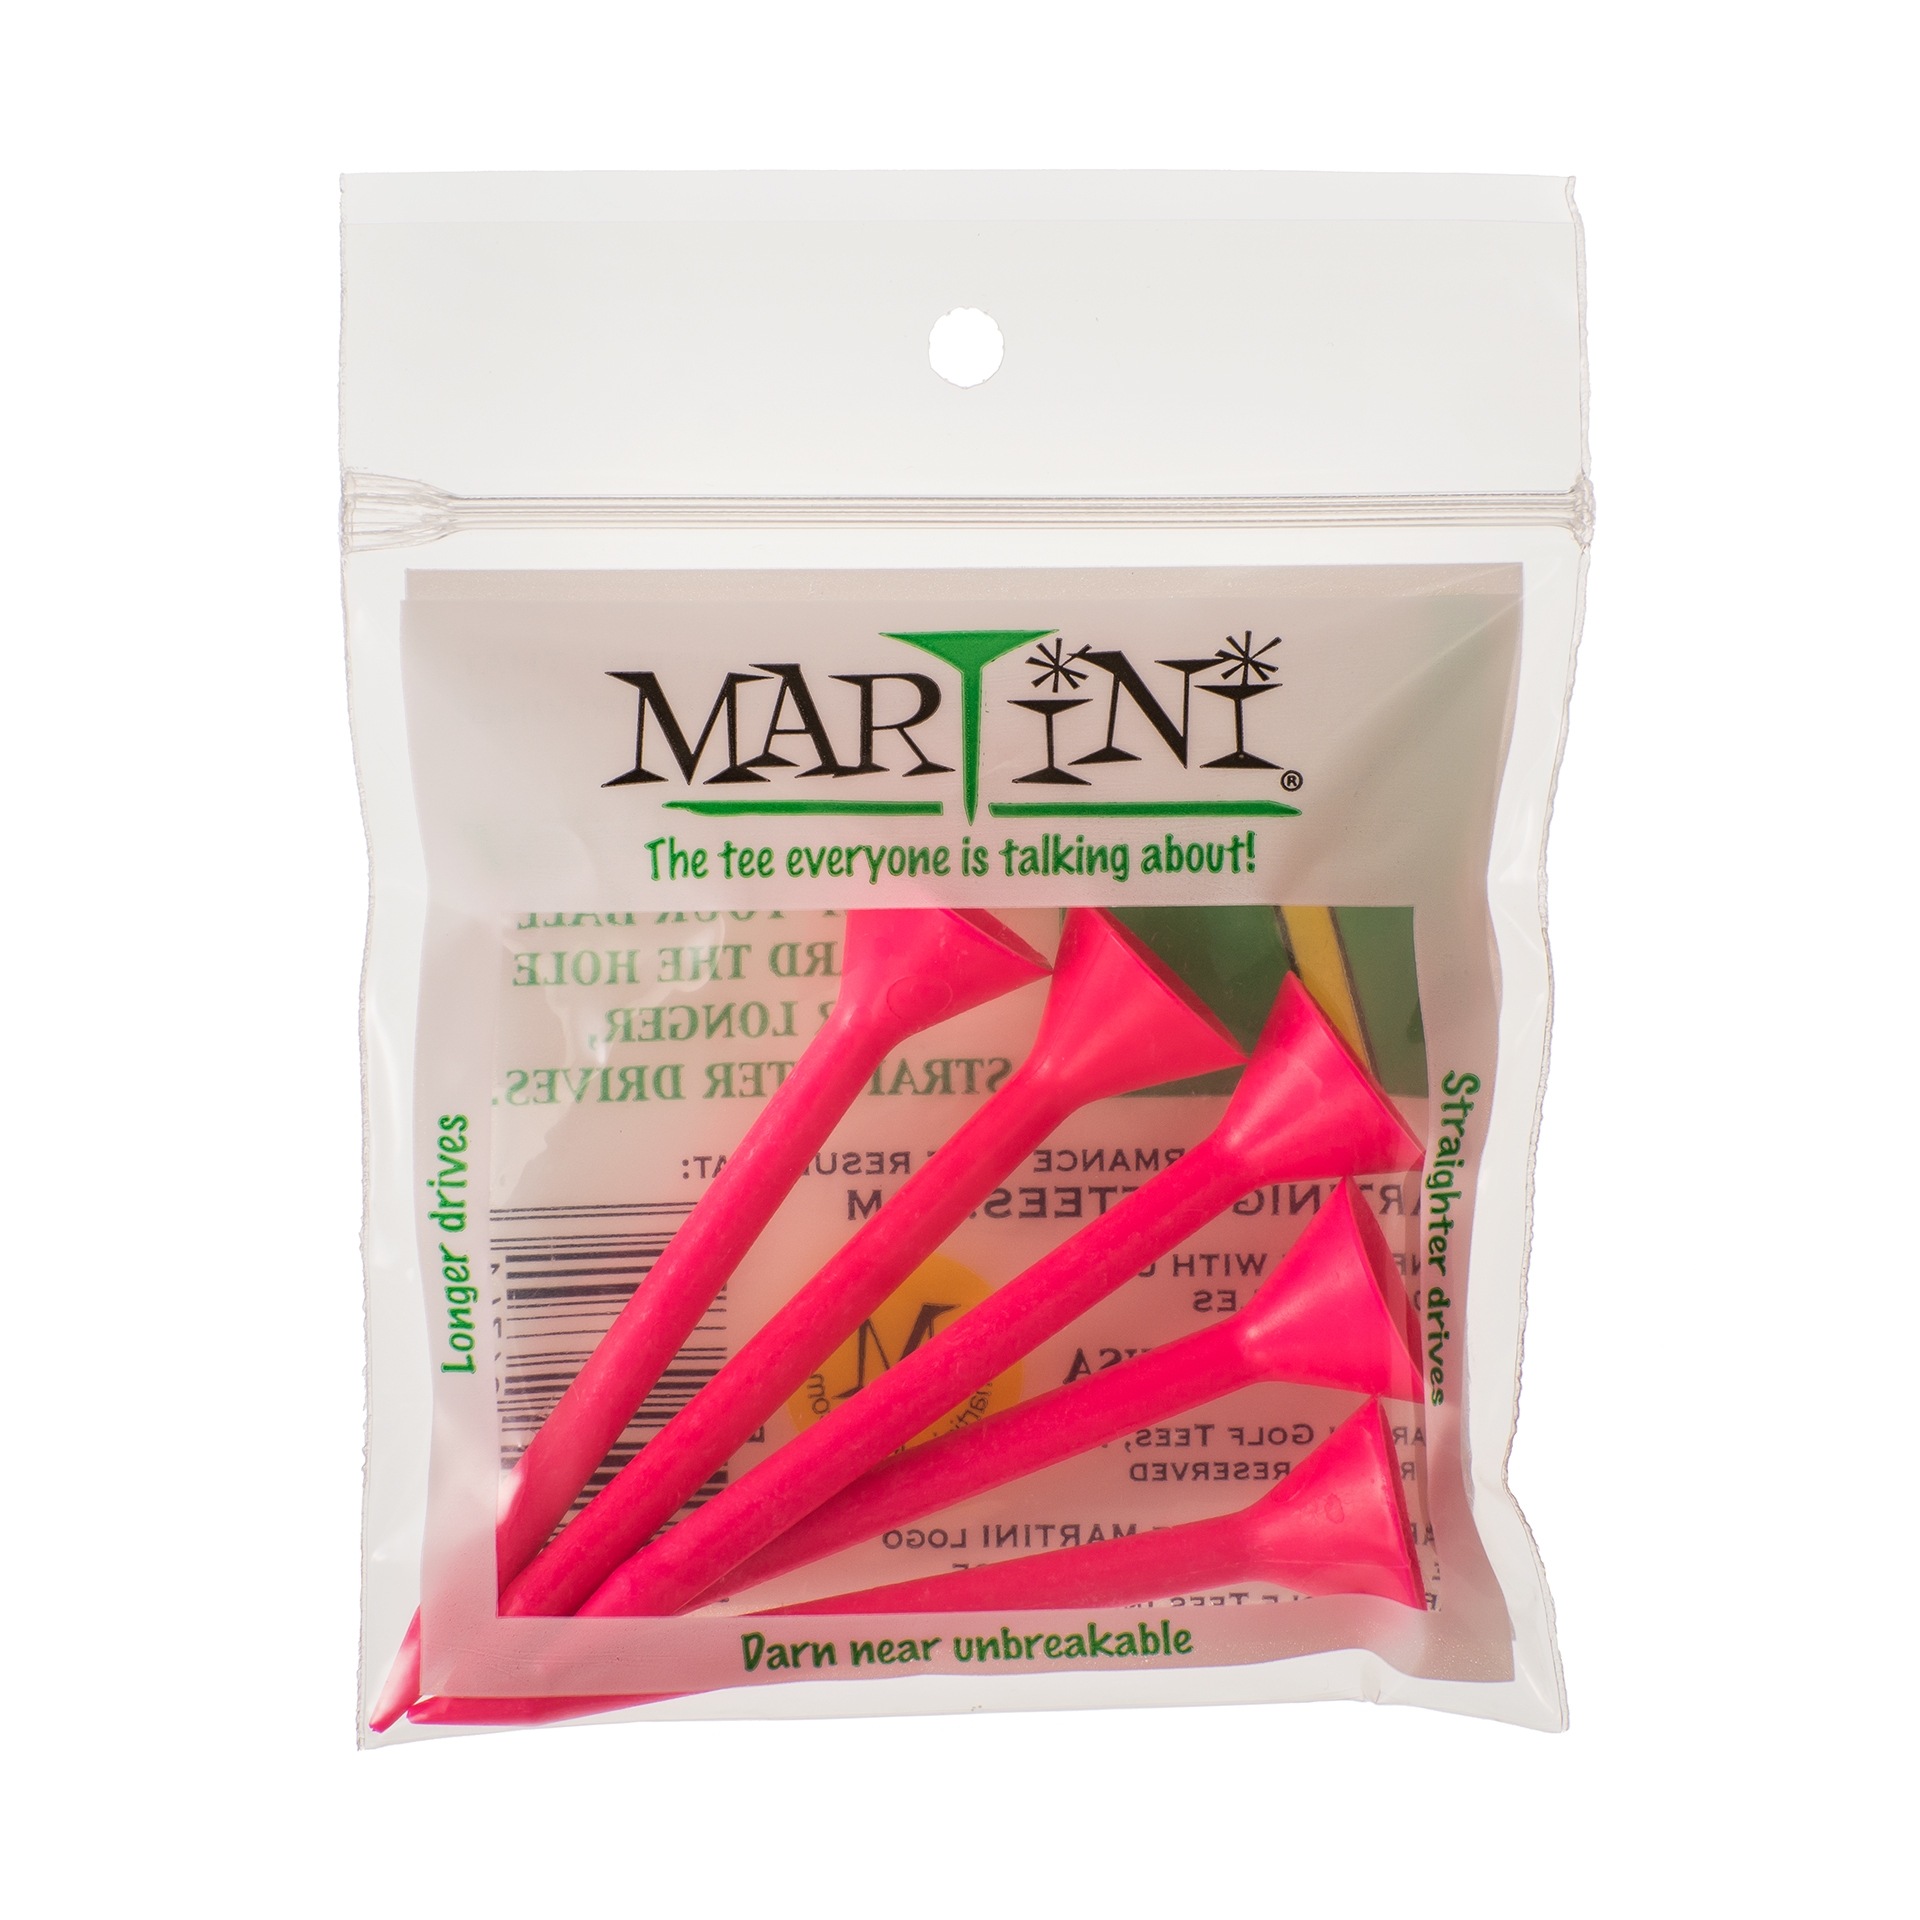 Martini Tees 3 1/4" Pink Pack of 5 - image 1 of 2